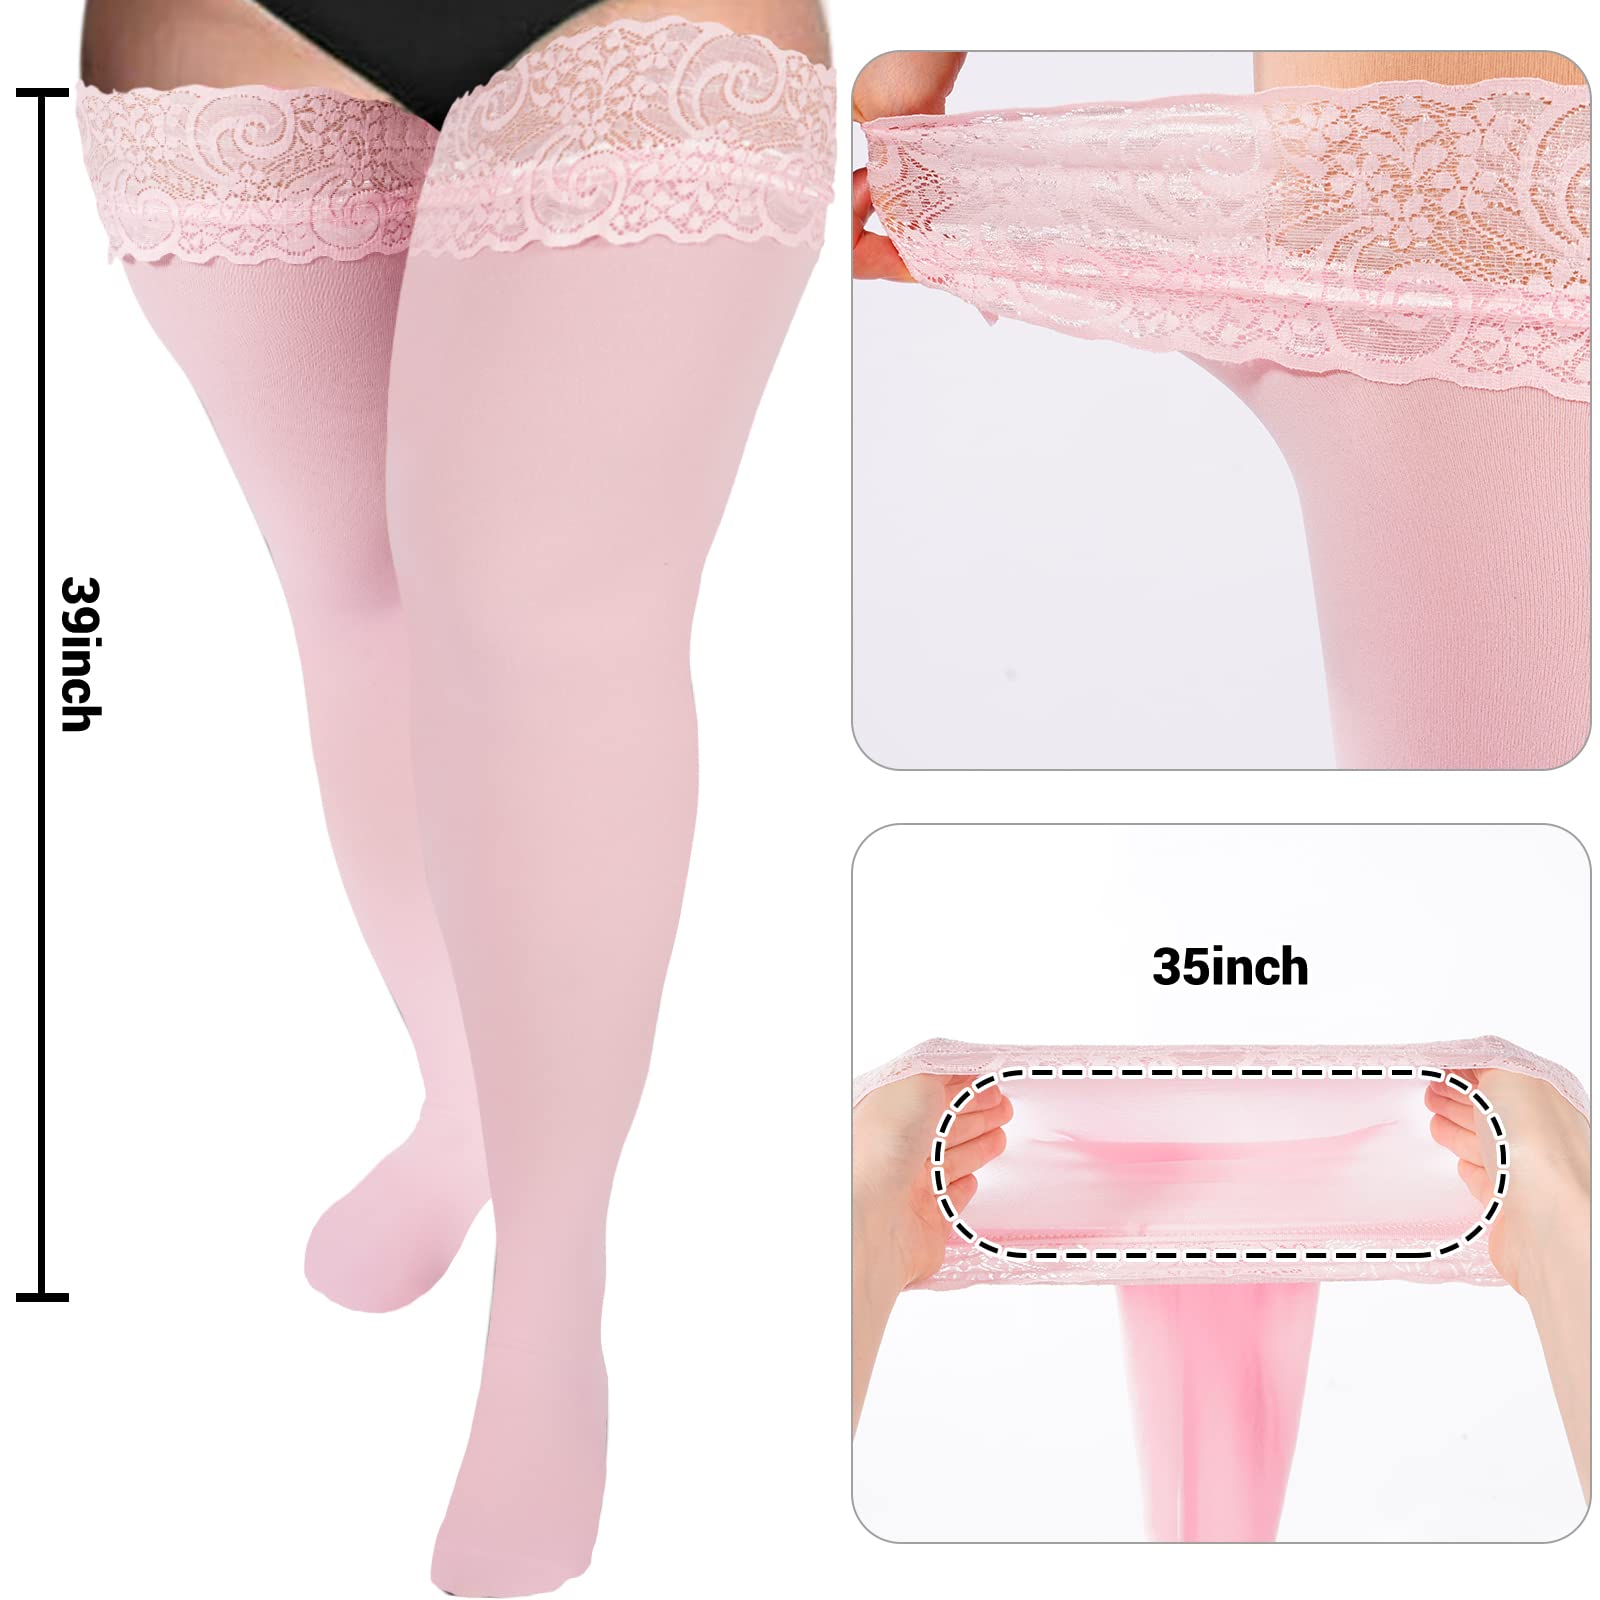 55D Semi Sheer Silicone Lace Stay Up Thigh Highs Pantyhose-Light Pink - Moon Wood